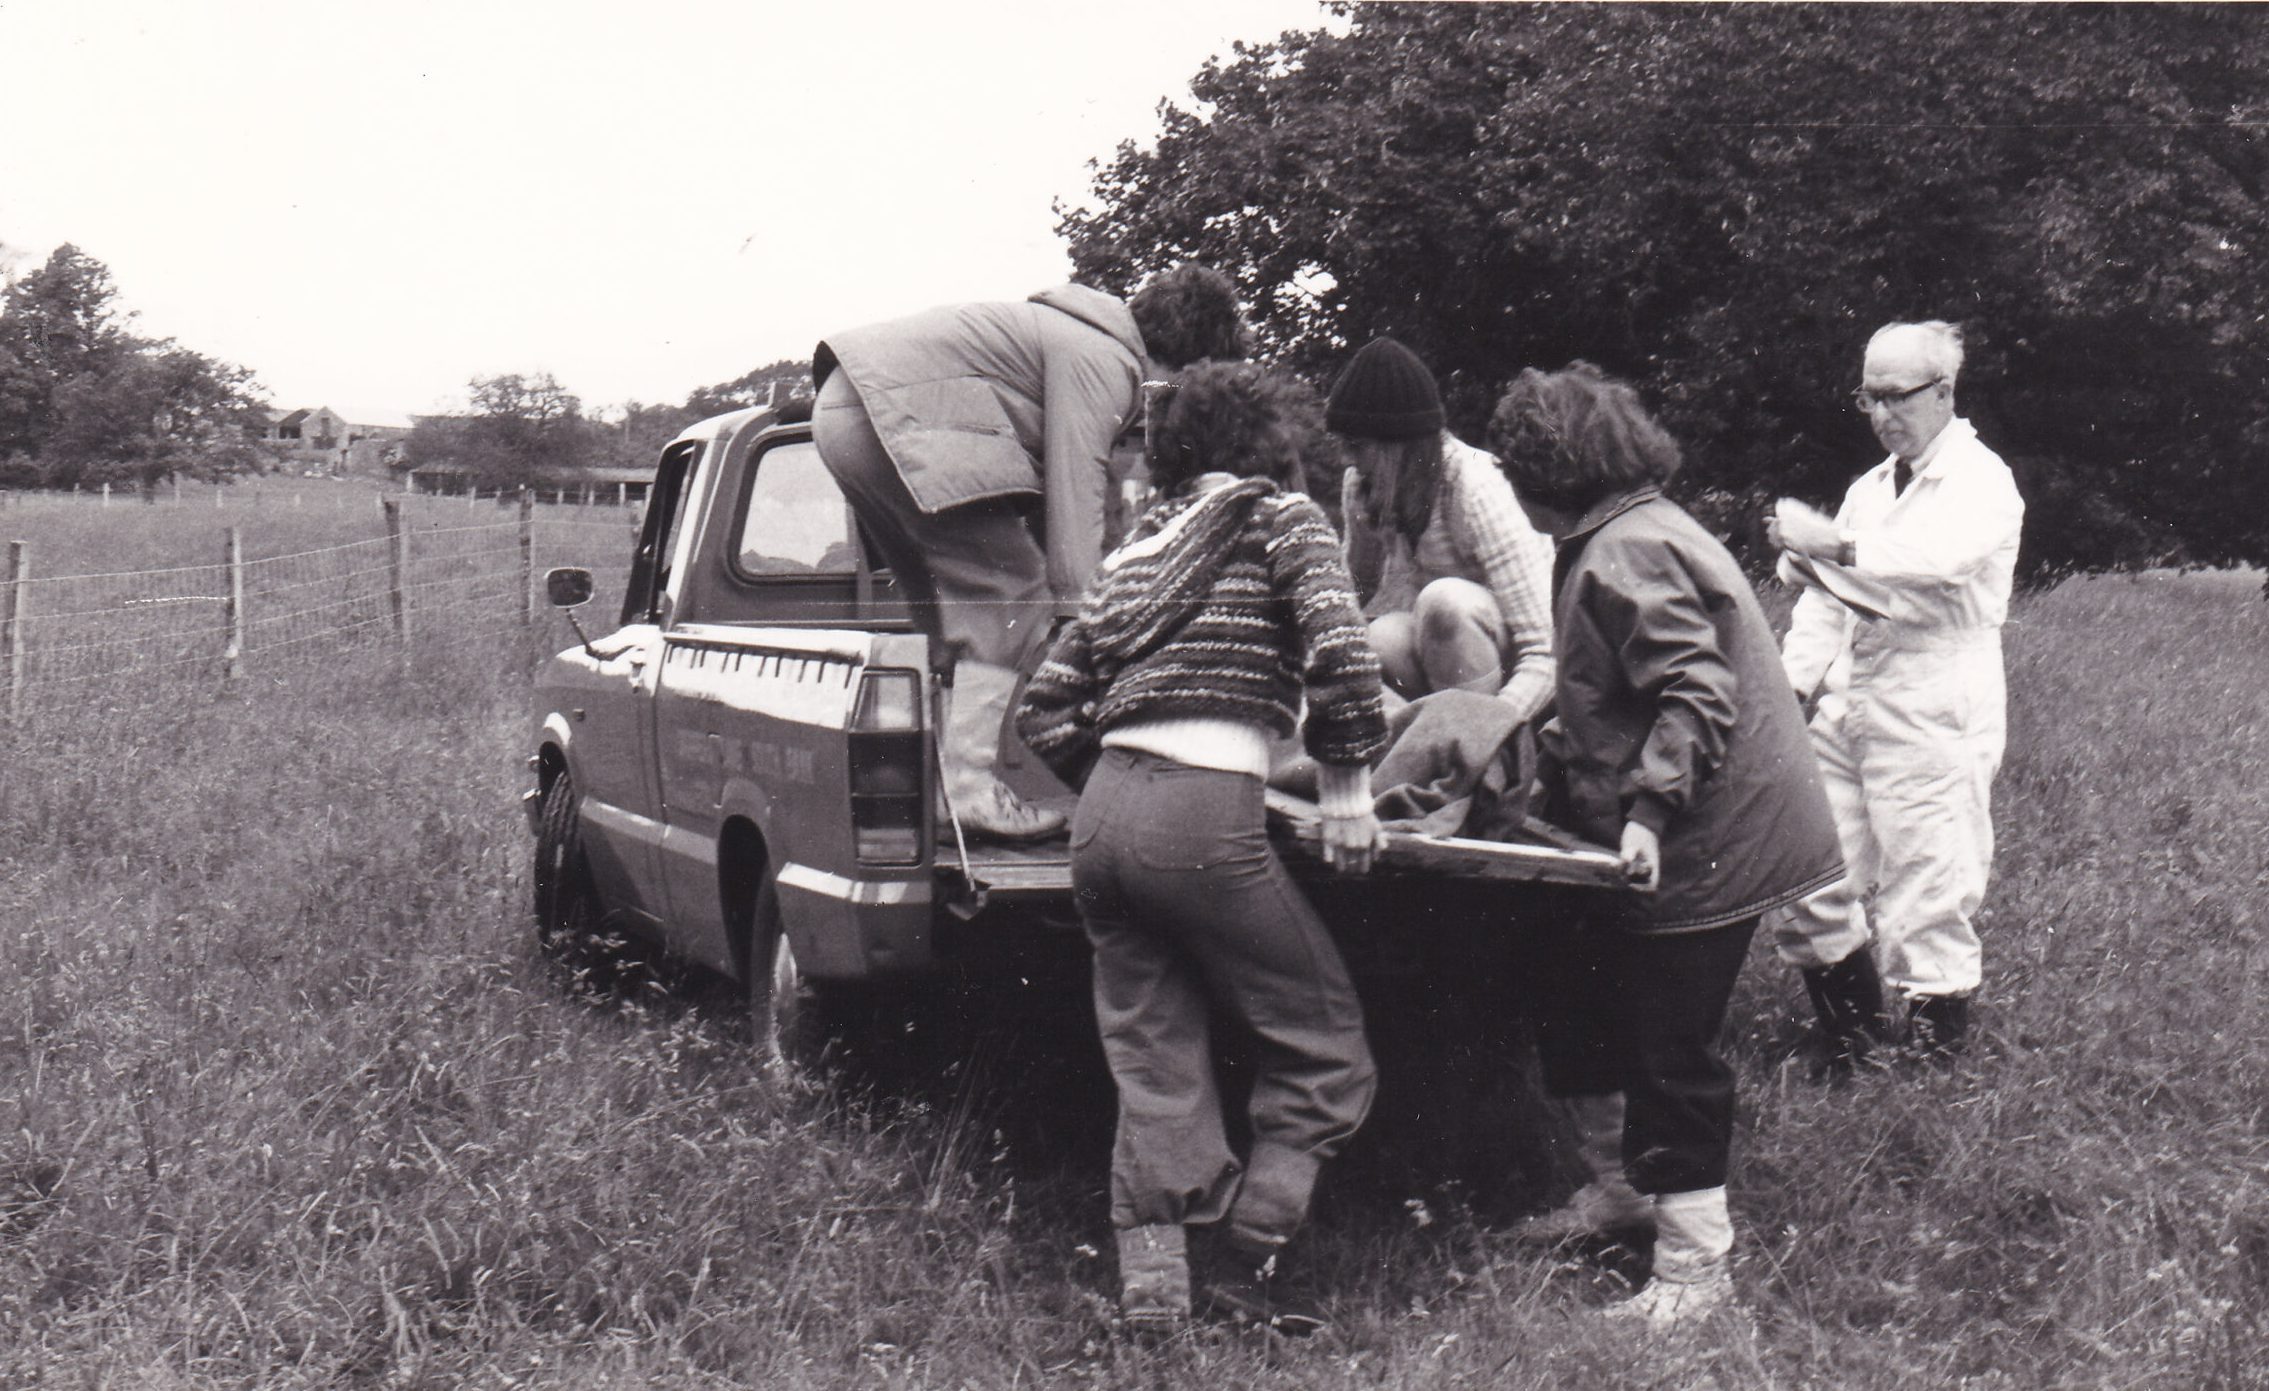 Black and white photograph of four young people lifting a person onto the back of a truck on a stretcher. An adult male looks on and is making notes on a clipboard. The truck is parked in a field.